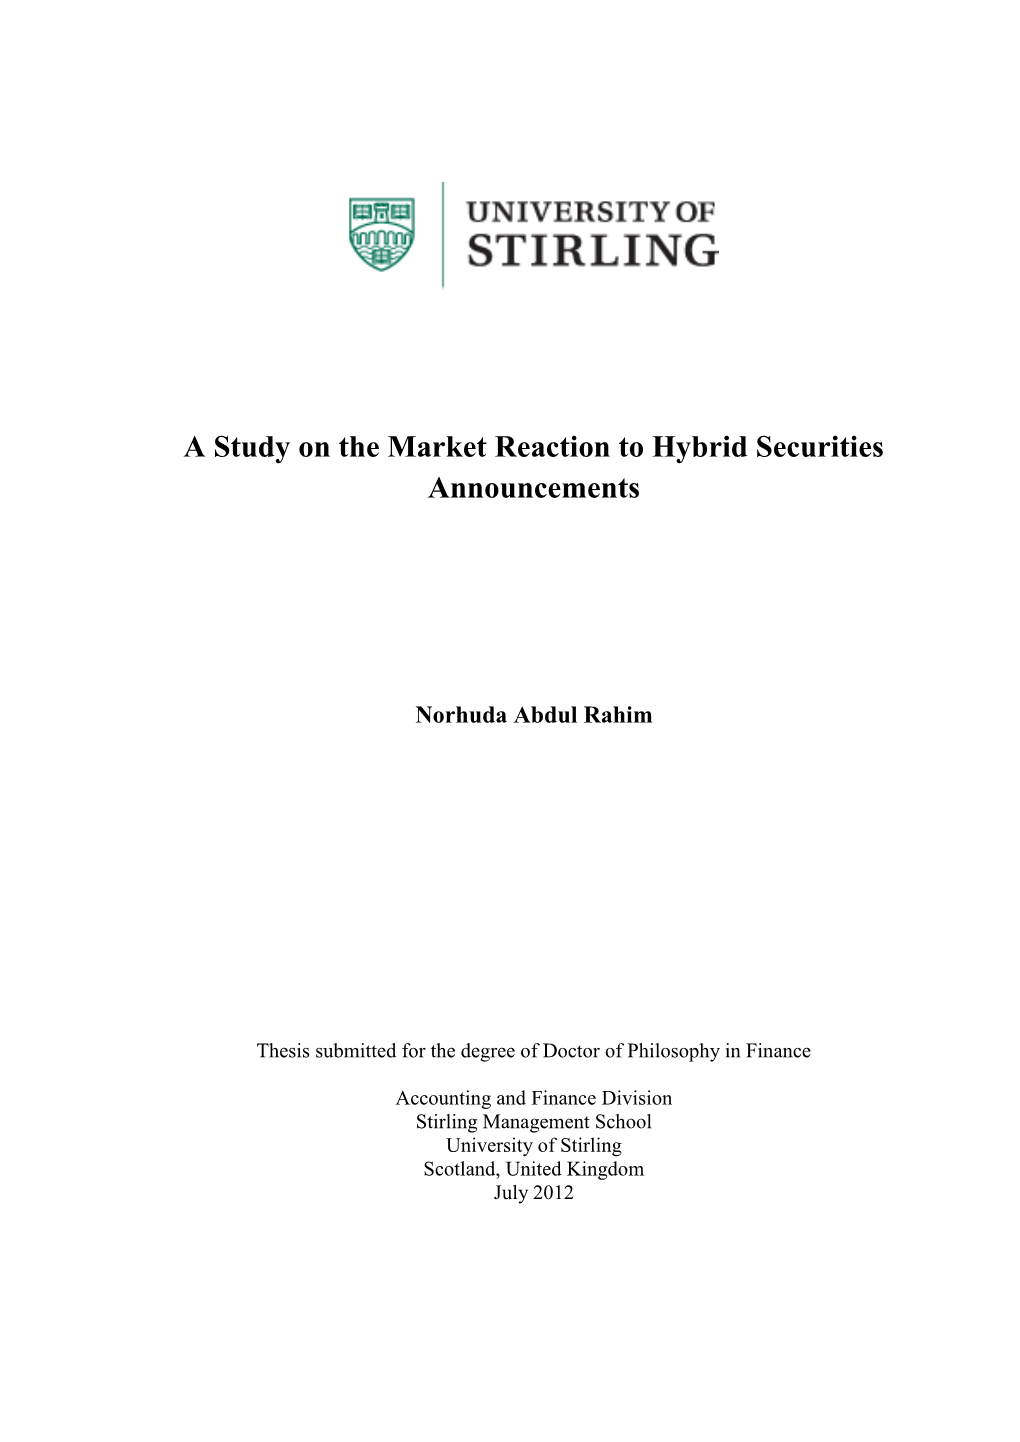 A Study on the Market Reaction to Hybrid Securities Announcements